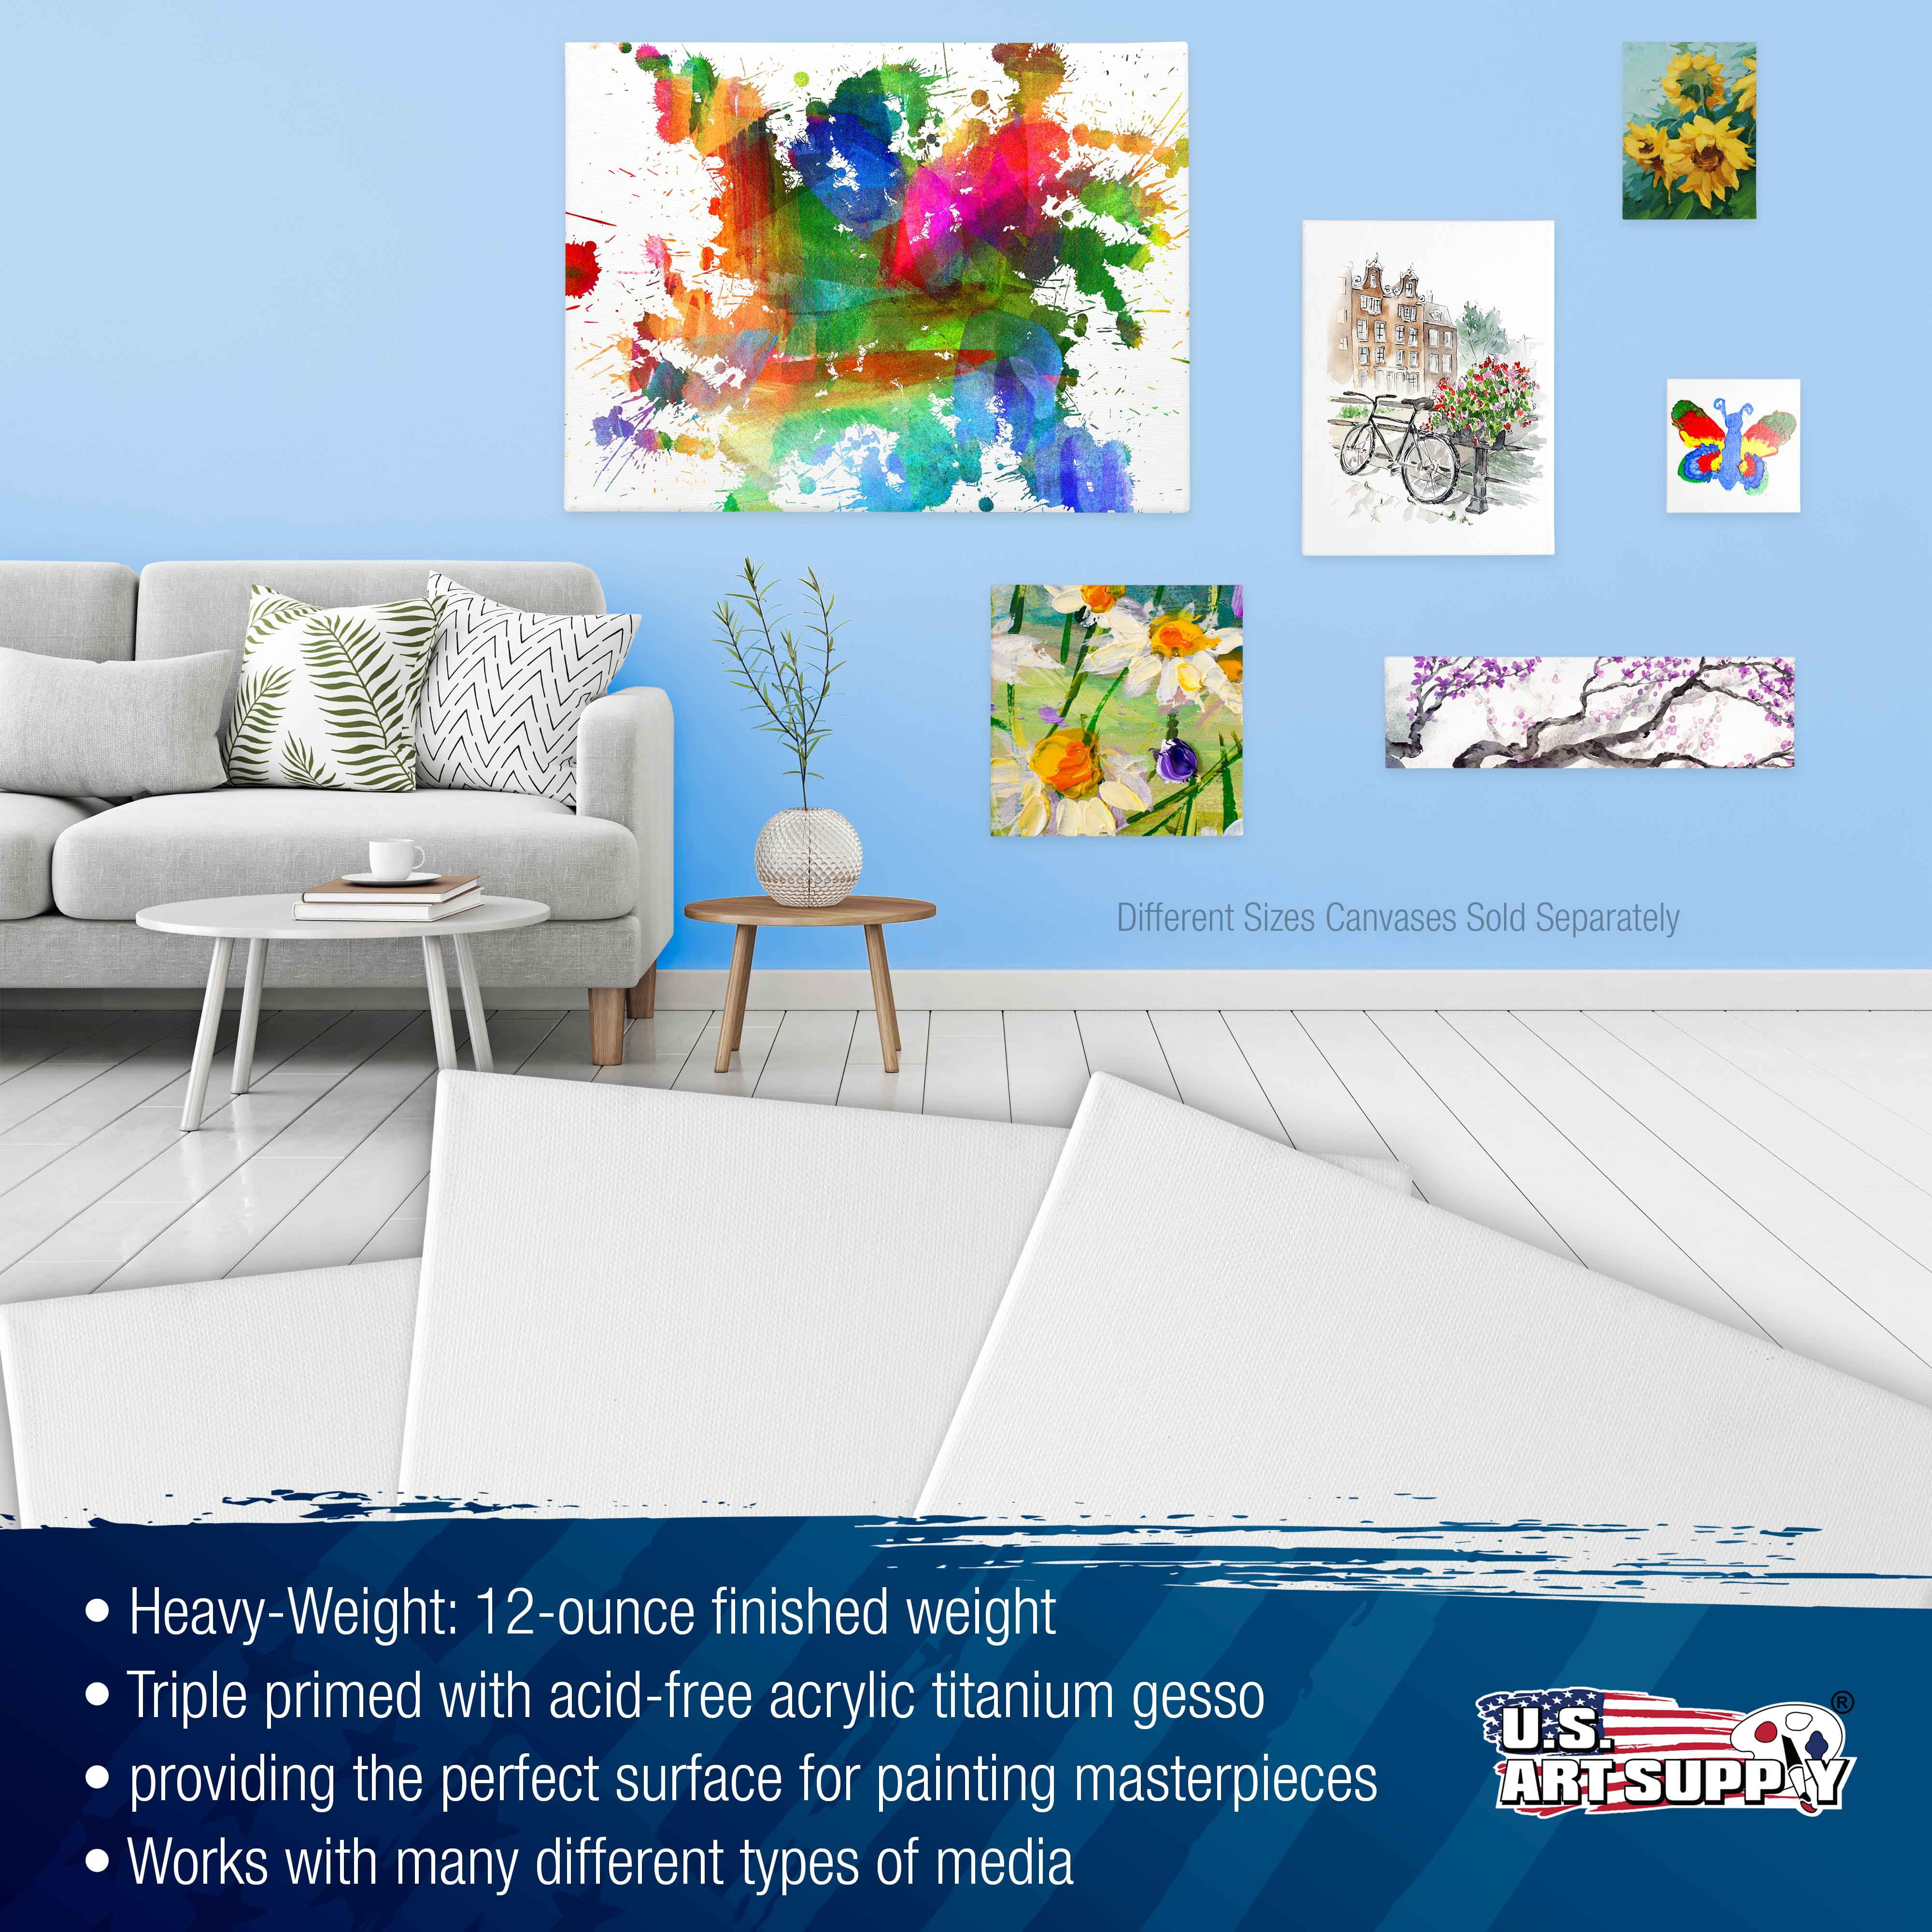 Stretched Canvases for Painting 2 Pack 30x40 inch, 100% Cotton 12.3 oz Triple Primed Painting Canvas, 3/4 Profile Acid-Free Large Paint Canvas